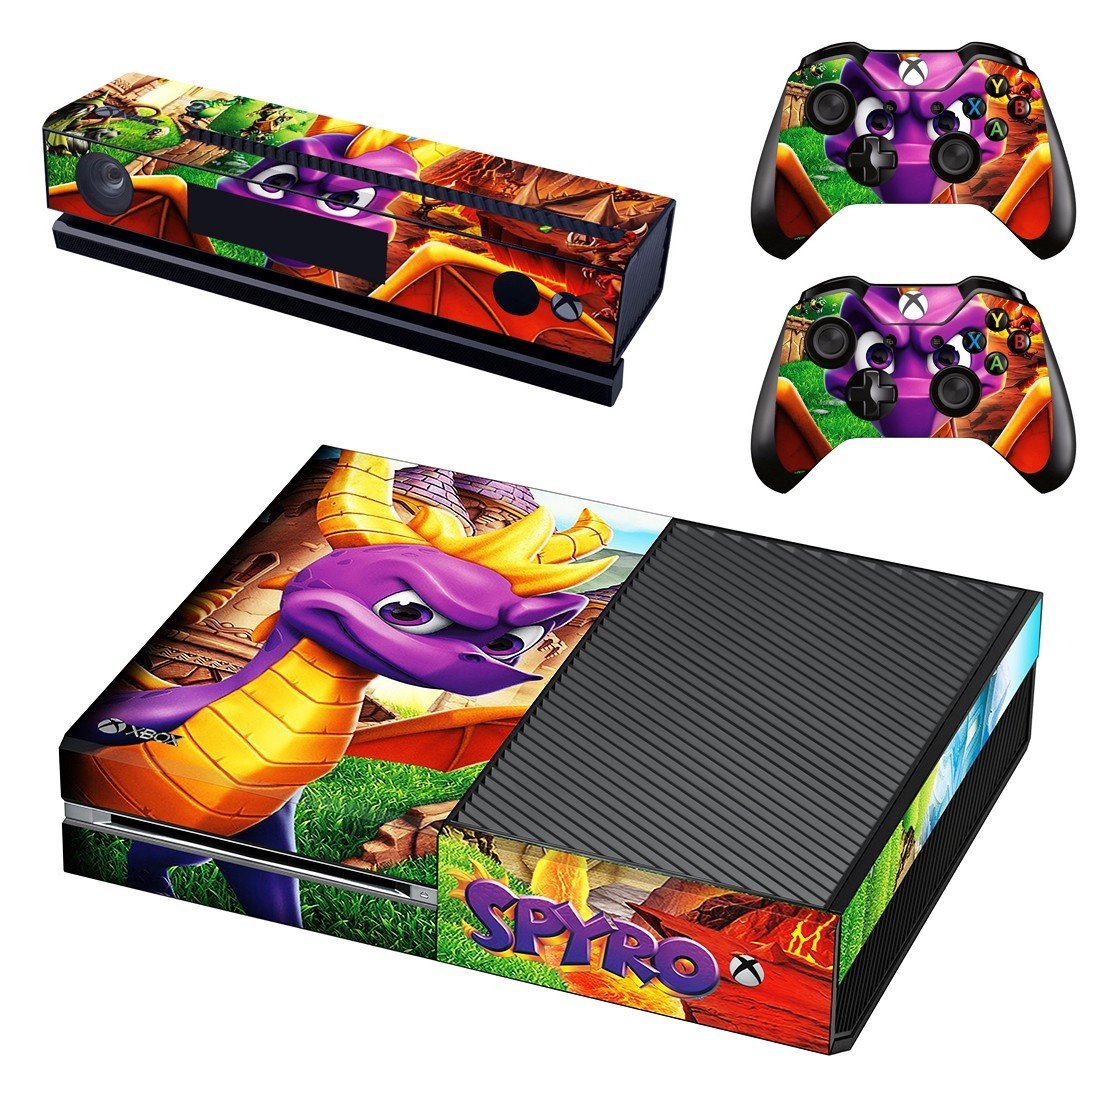 Xbox One And Controllers Skin Cover Spyro